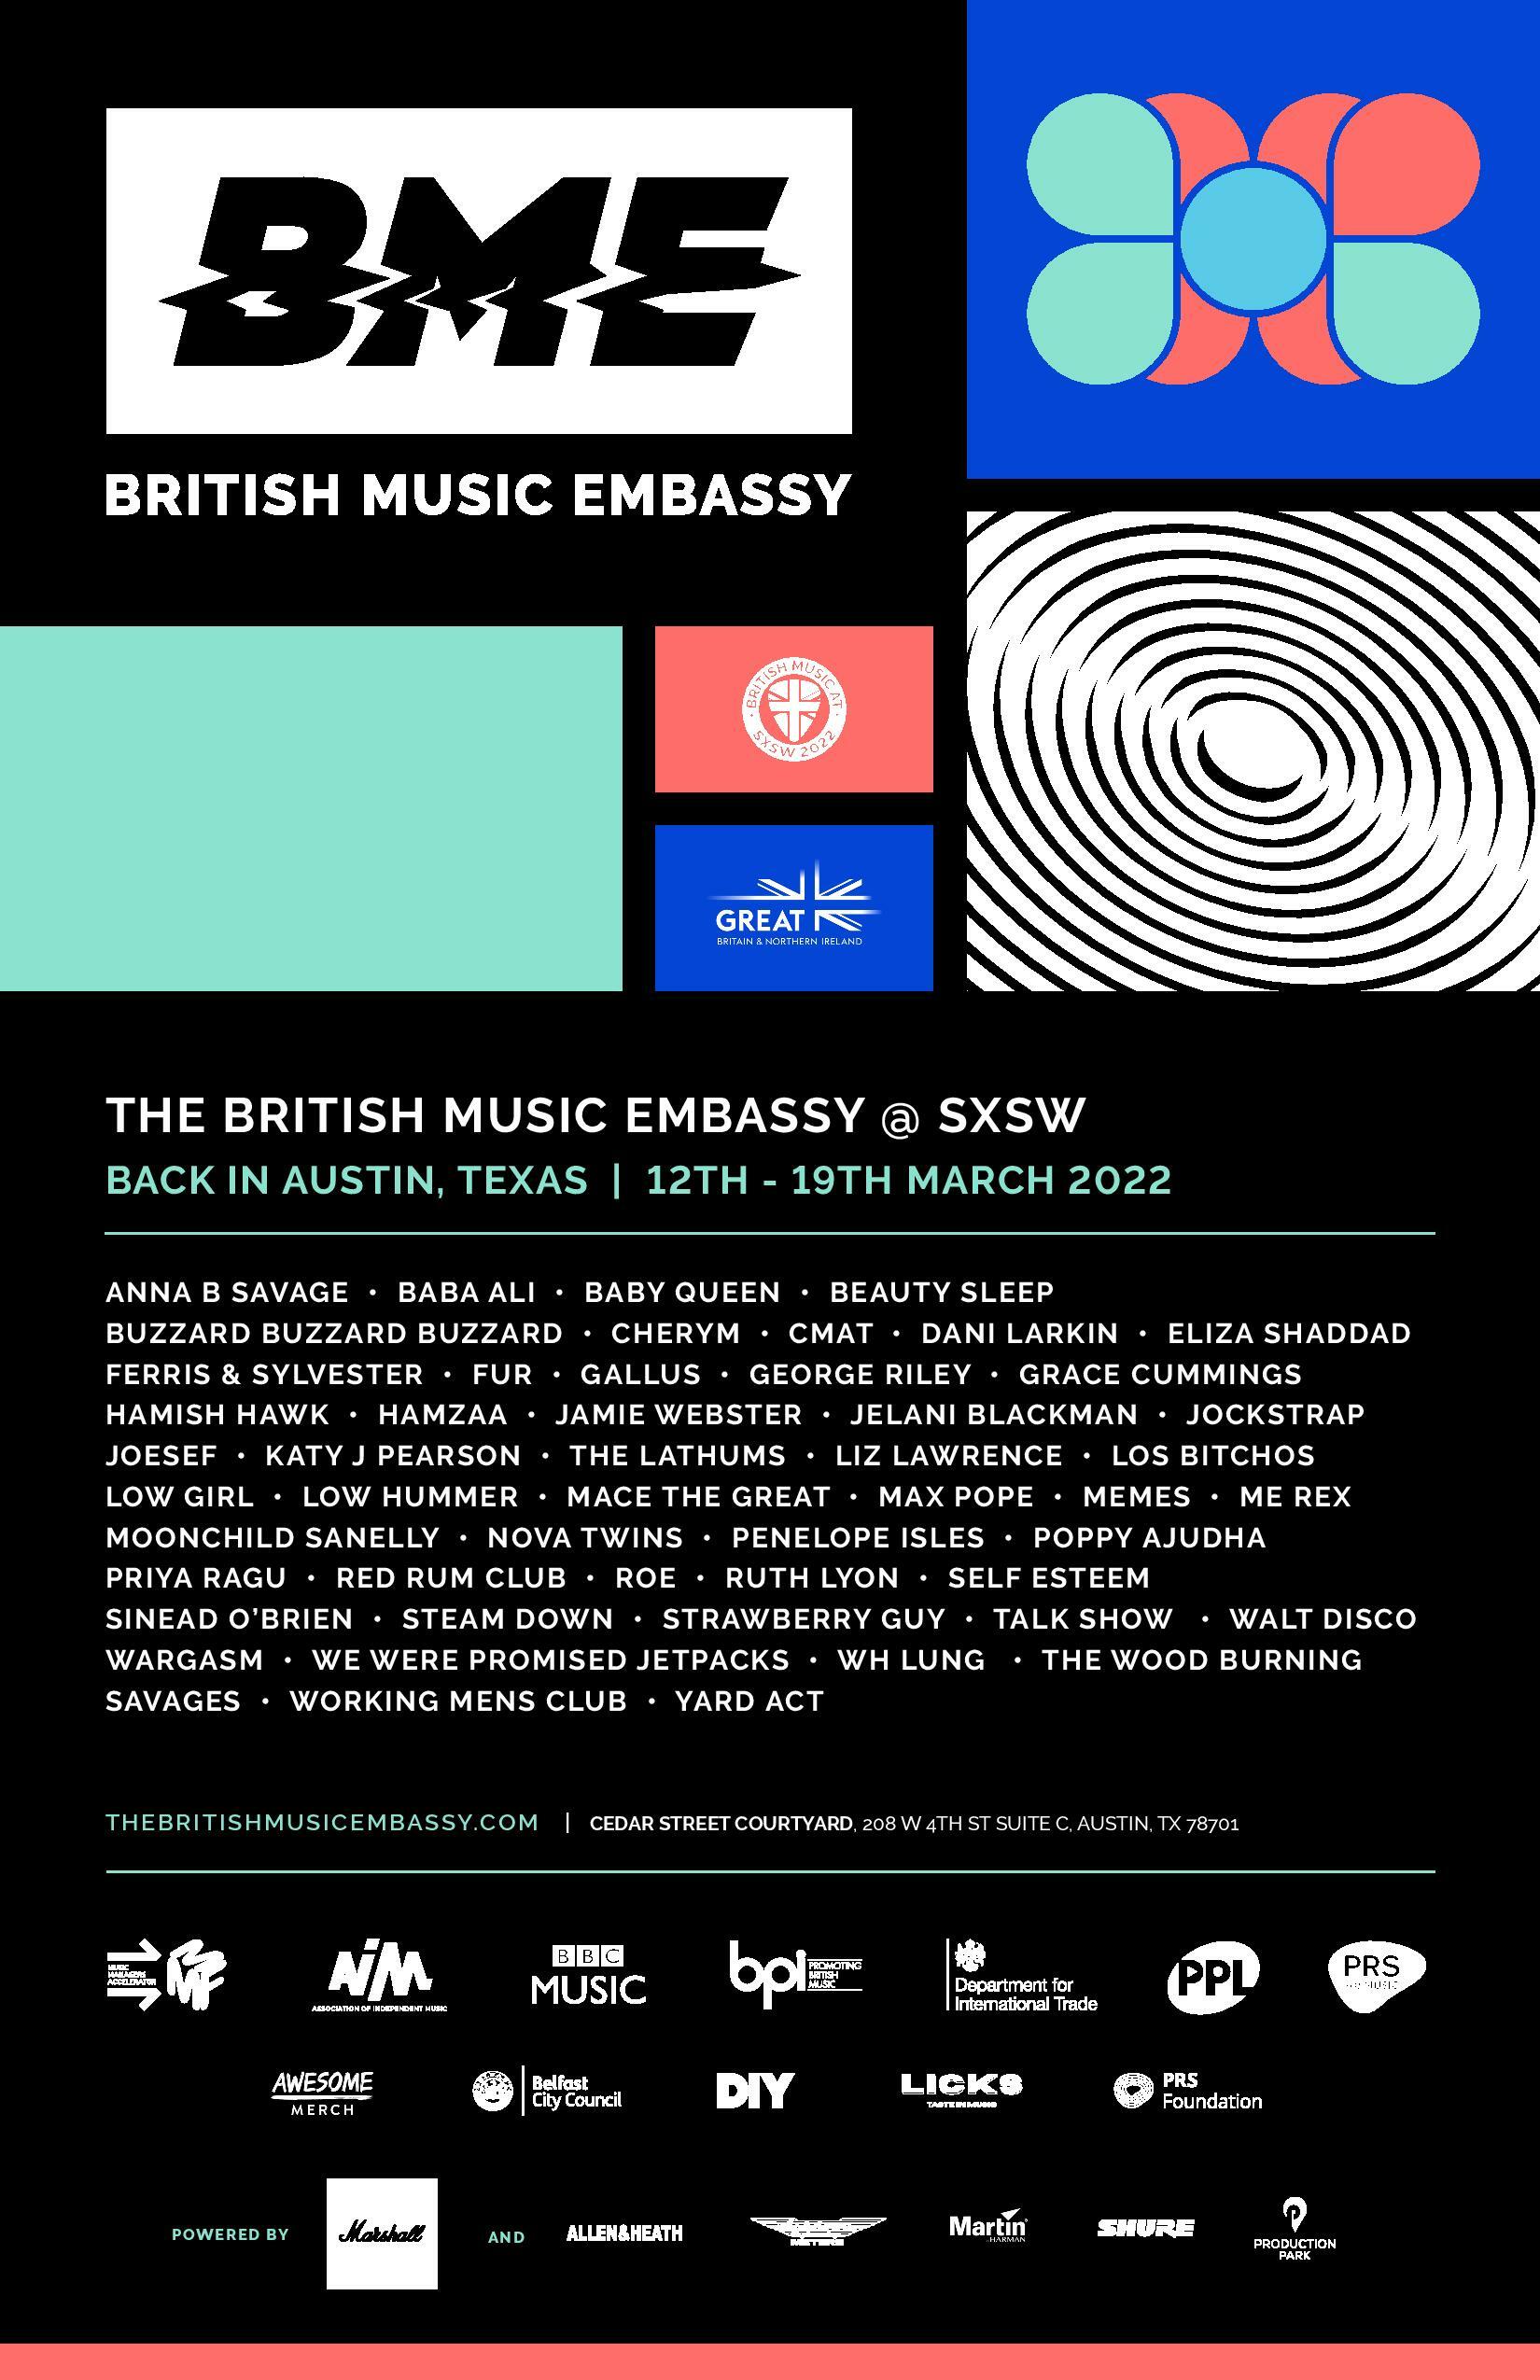 Yard Act, Self Esteem, CMAT, Jockstrap and loads more to play the British Music Embassy at SXSW 2022